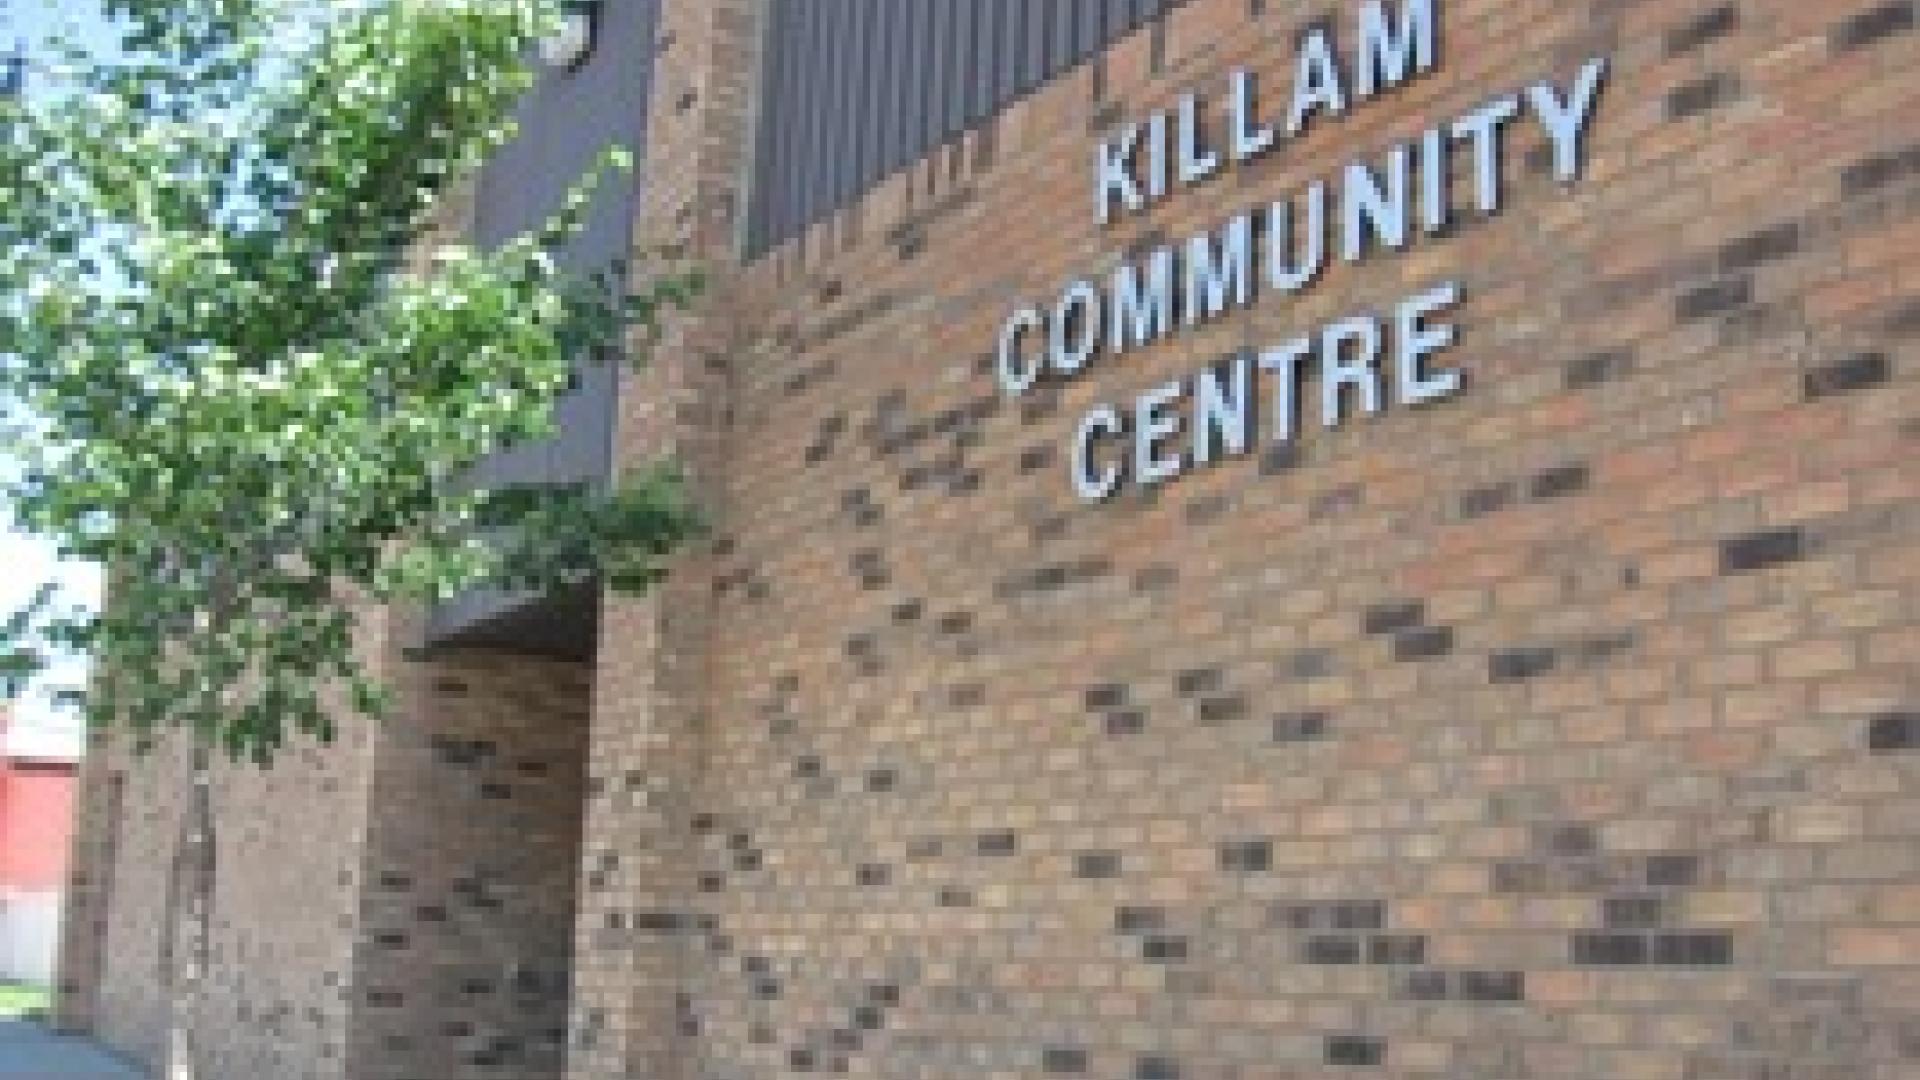 Exterior of Killam Community Centre. The building is made out of red brick and has lettering saying "Killam Community Centre" in a metal / silver colour.